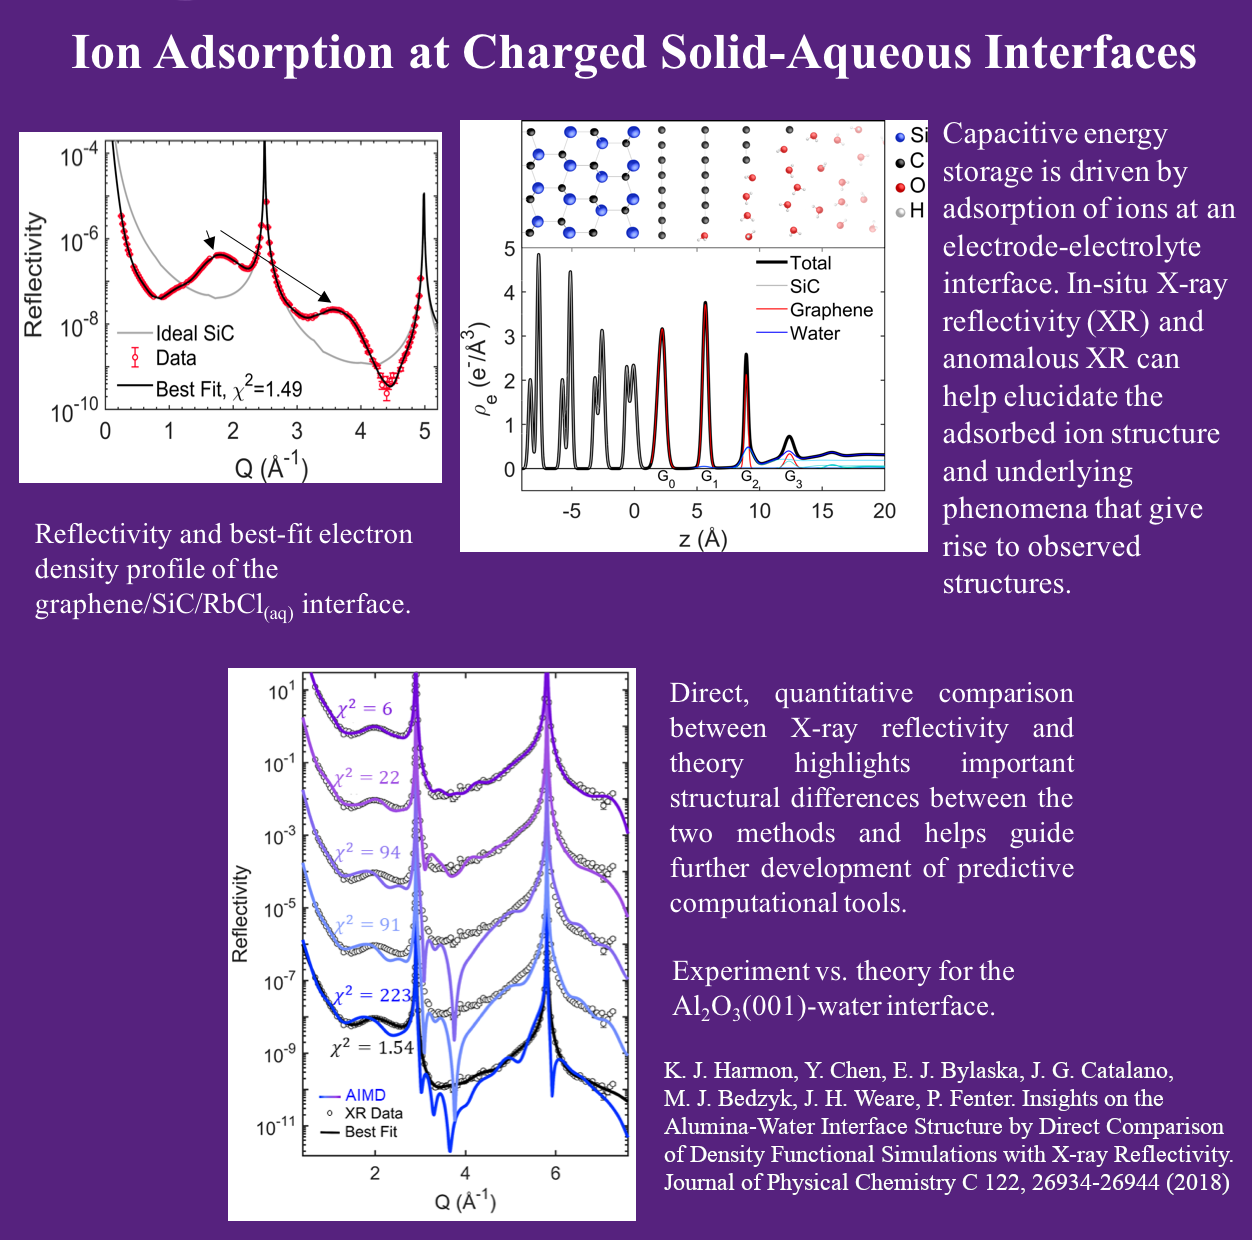 Ion adsorption at charged solid-aqueous interfaces. Figure: Reflectivity and best-fit electron density profile of the graphene/silicon carbide/rubidium chloride interface. Capacitive energy storage is driven by adsorption of ions at an electrode-electrolyte interface. In-situ X-ray reflectivity (XR) and anomalous XR can help elucidate the adsorbed ion structure and underlying phenomena that give rise to observed structures. Direct, quantitative comparison between X-ray reflectivity and theory highlights important structural differences between the two methods and helps guide further development of predictive computational tools. Figure: Experiment vs. theory for the aluminum (II) oxide-water interface. K. J. Harmon, Y. Chen, E. J. Bylaska, J. G. Catalano, M. J. Bedzyk, J. H. Weare, P. Fenter. Insights on the Alumina-Water Interface Structure by Direct Comparison of Density Functional Simulations with X-ray Reflectivity. Journal of Physical Chemistry C 122, 26934-26944 (2018)